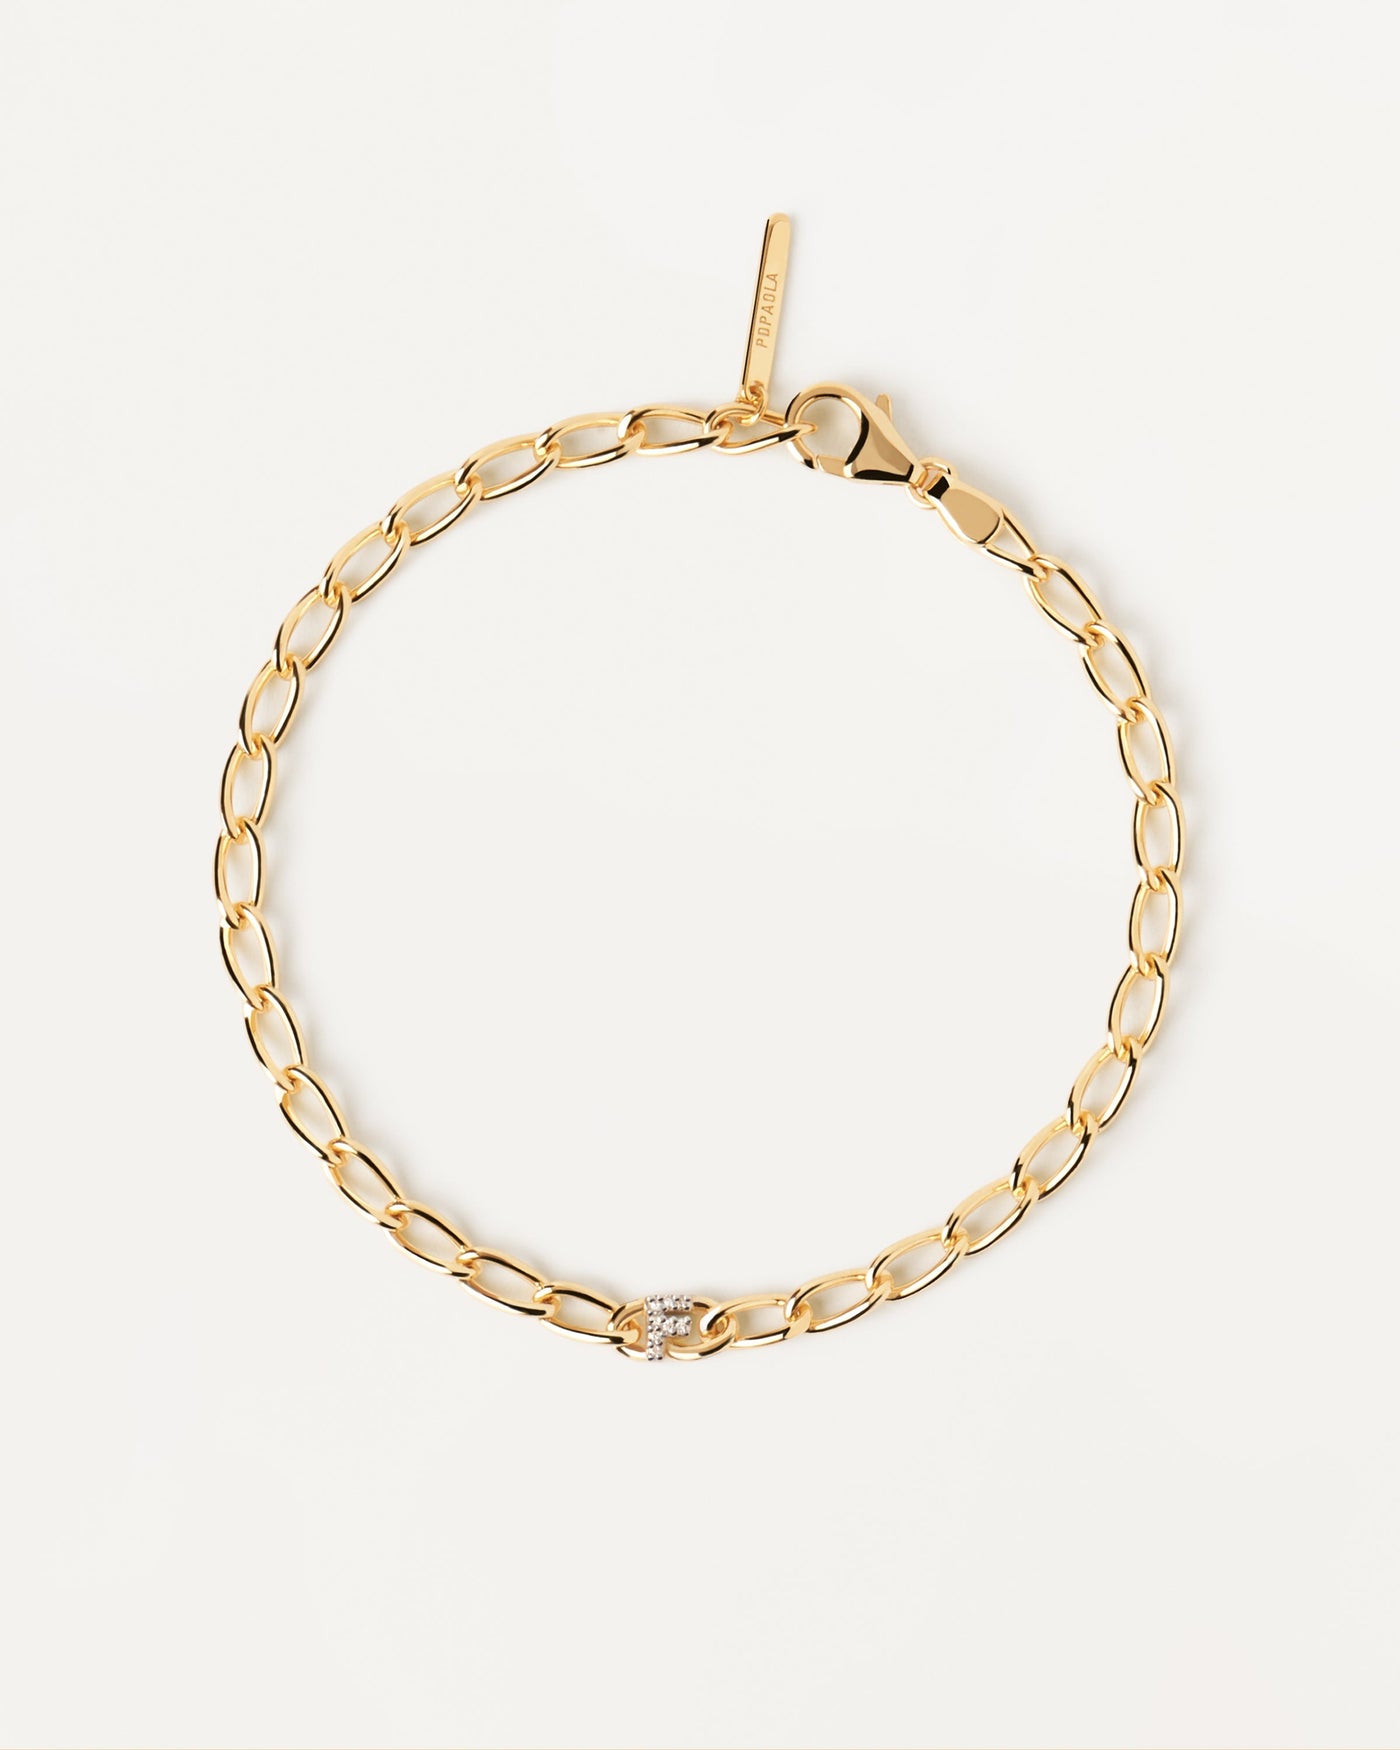 2023 Selection | Letter F Chain Bracelet. cable chain bracelet in gold-plated silver with initial F in zirconia. Get the latest arrival from PDPAOLA. Place your order safely and get this Best Seller. Free Shipping.